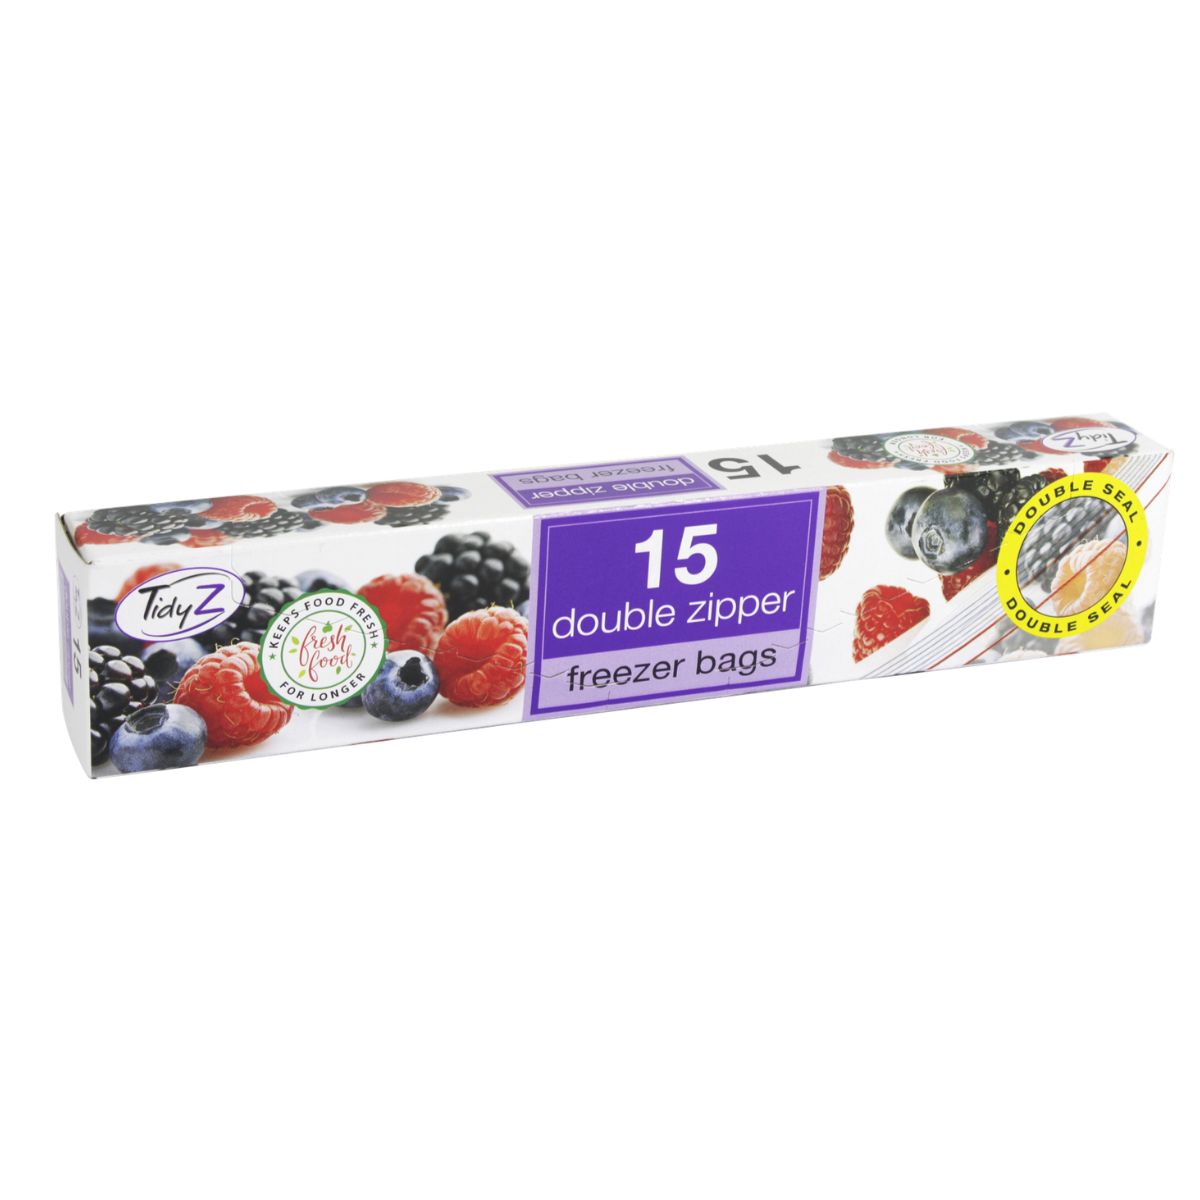 Package of Tidyz Double Zipper Freezer Bags - 15pcs with berry design.